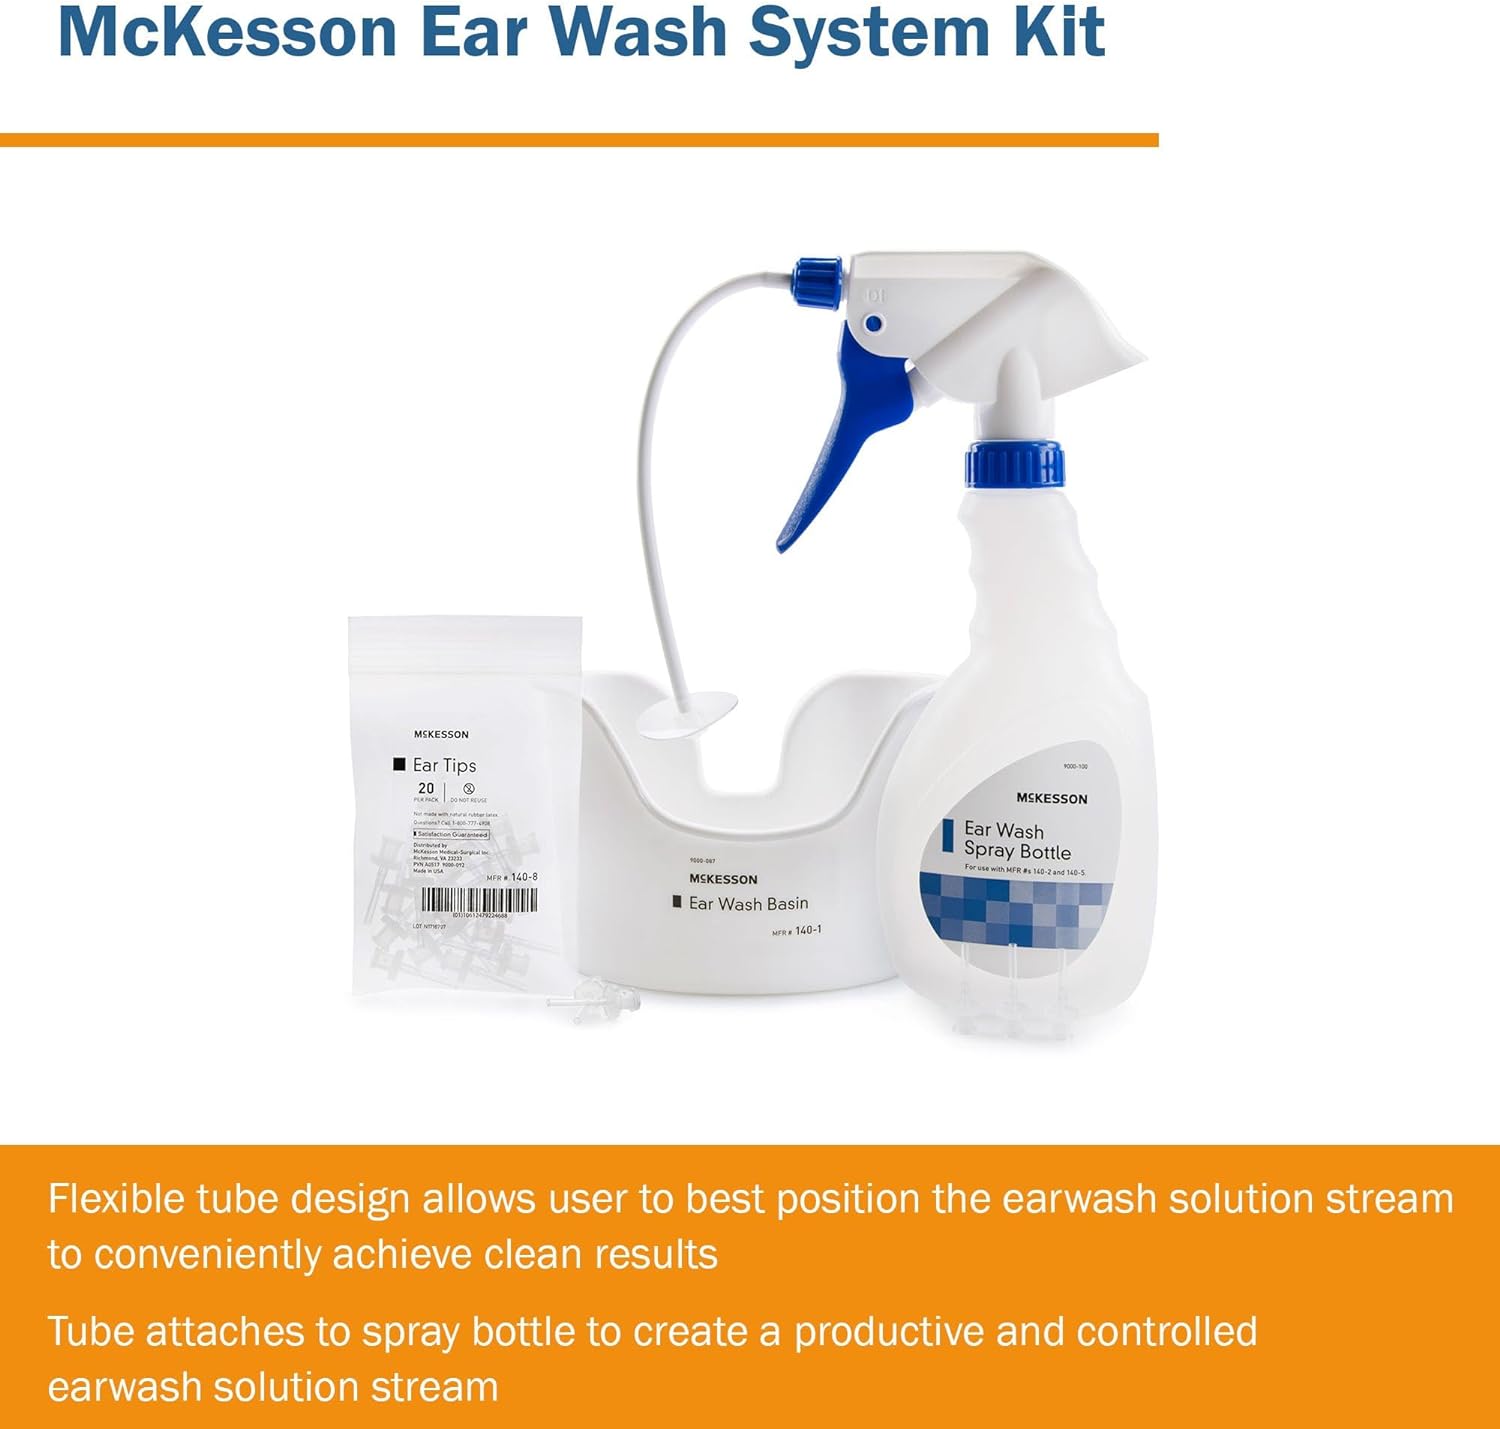 McKesson Ear Wash System Kit - Includes Spray Bottle, Flexible Tube, Ear Wash Basin, and Ear Tips - Blue and White, 16 oz Bottle, 1 Count, 1 Pack